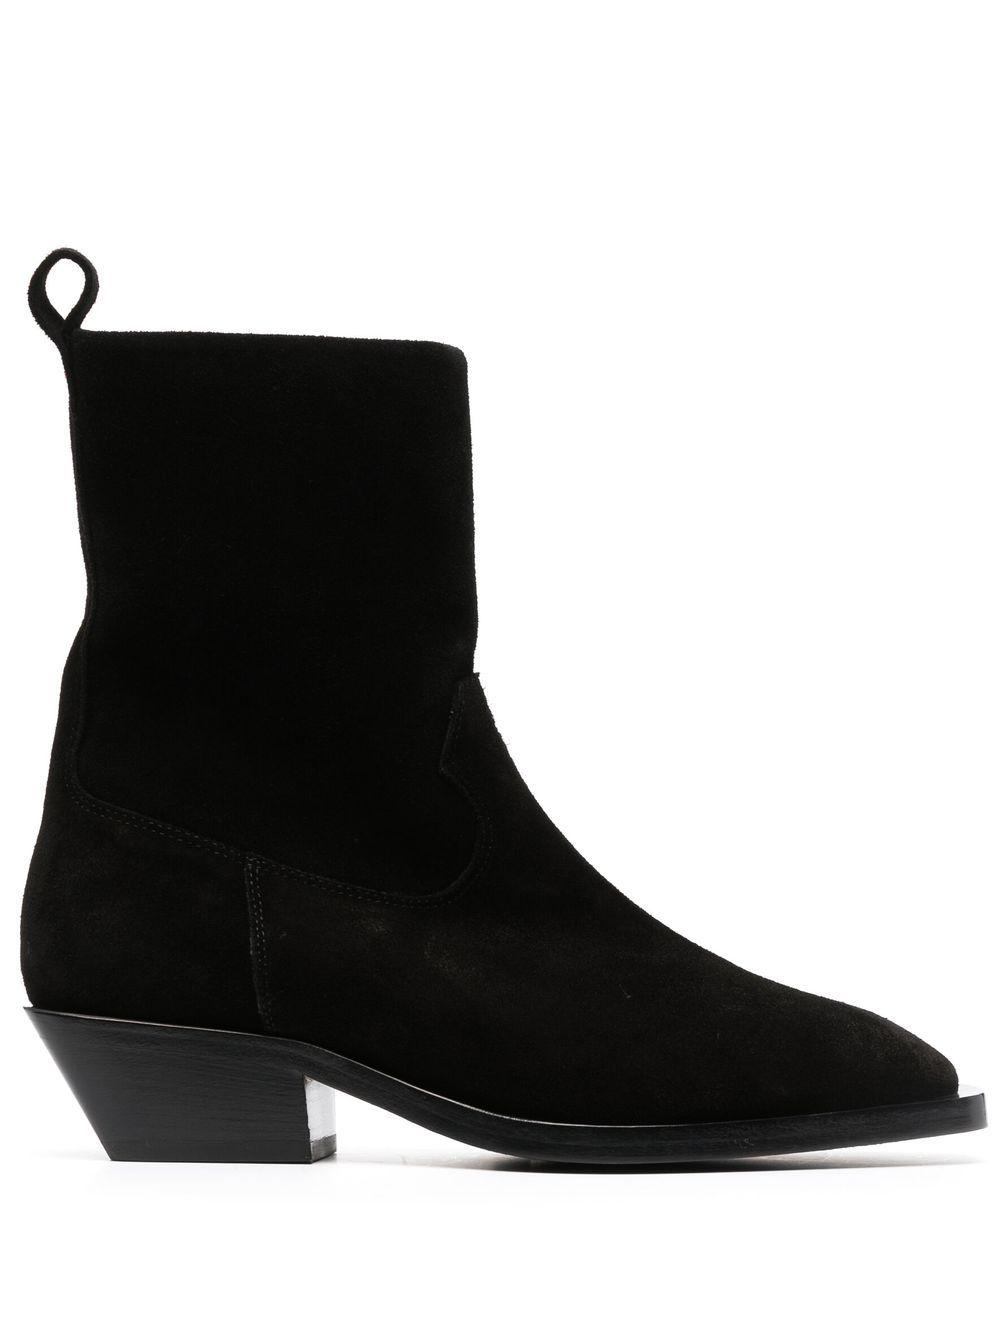 Aeyde Luiscow Suede Ankle Boots in Black | Lyst